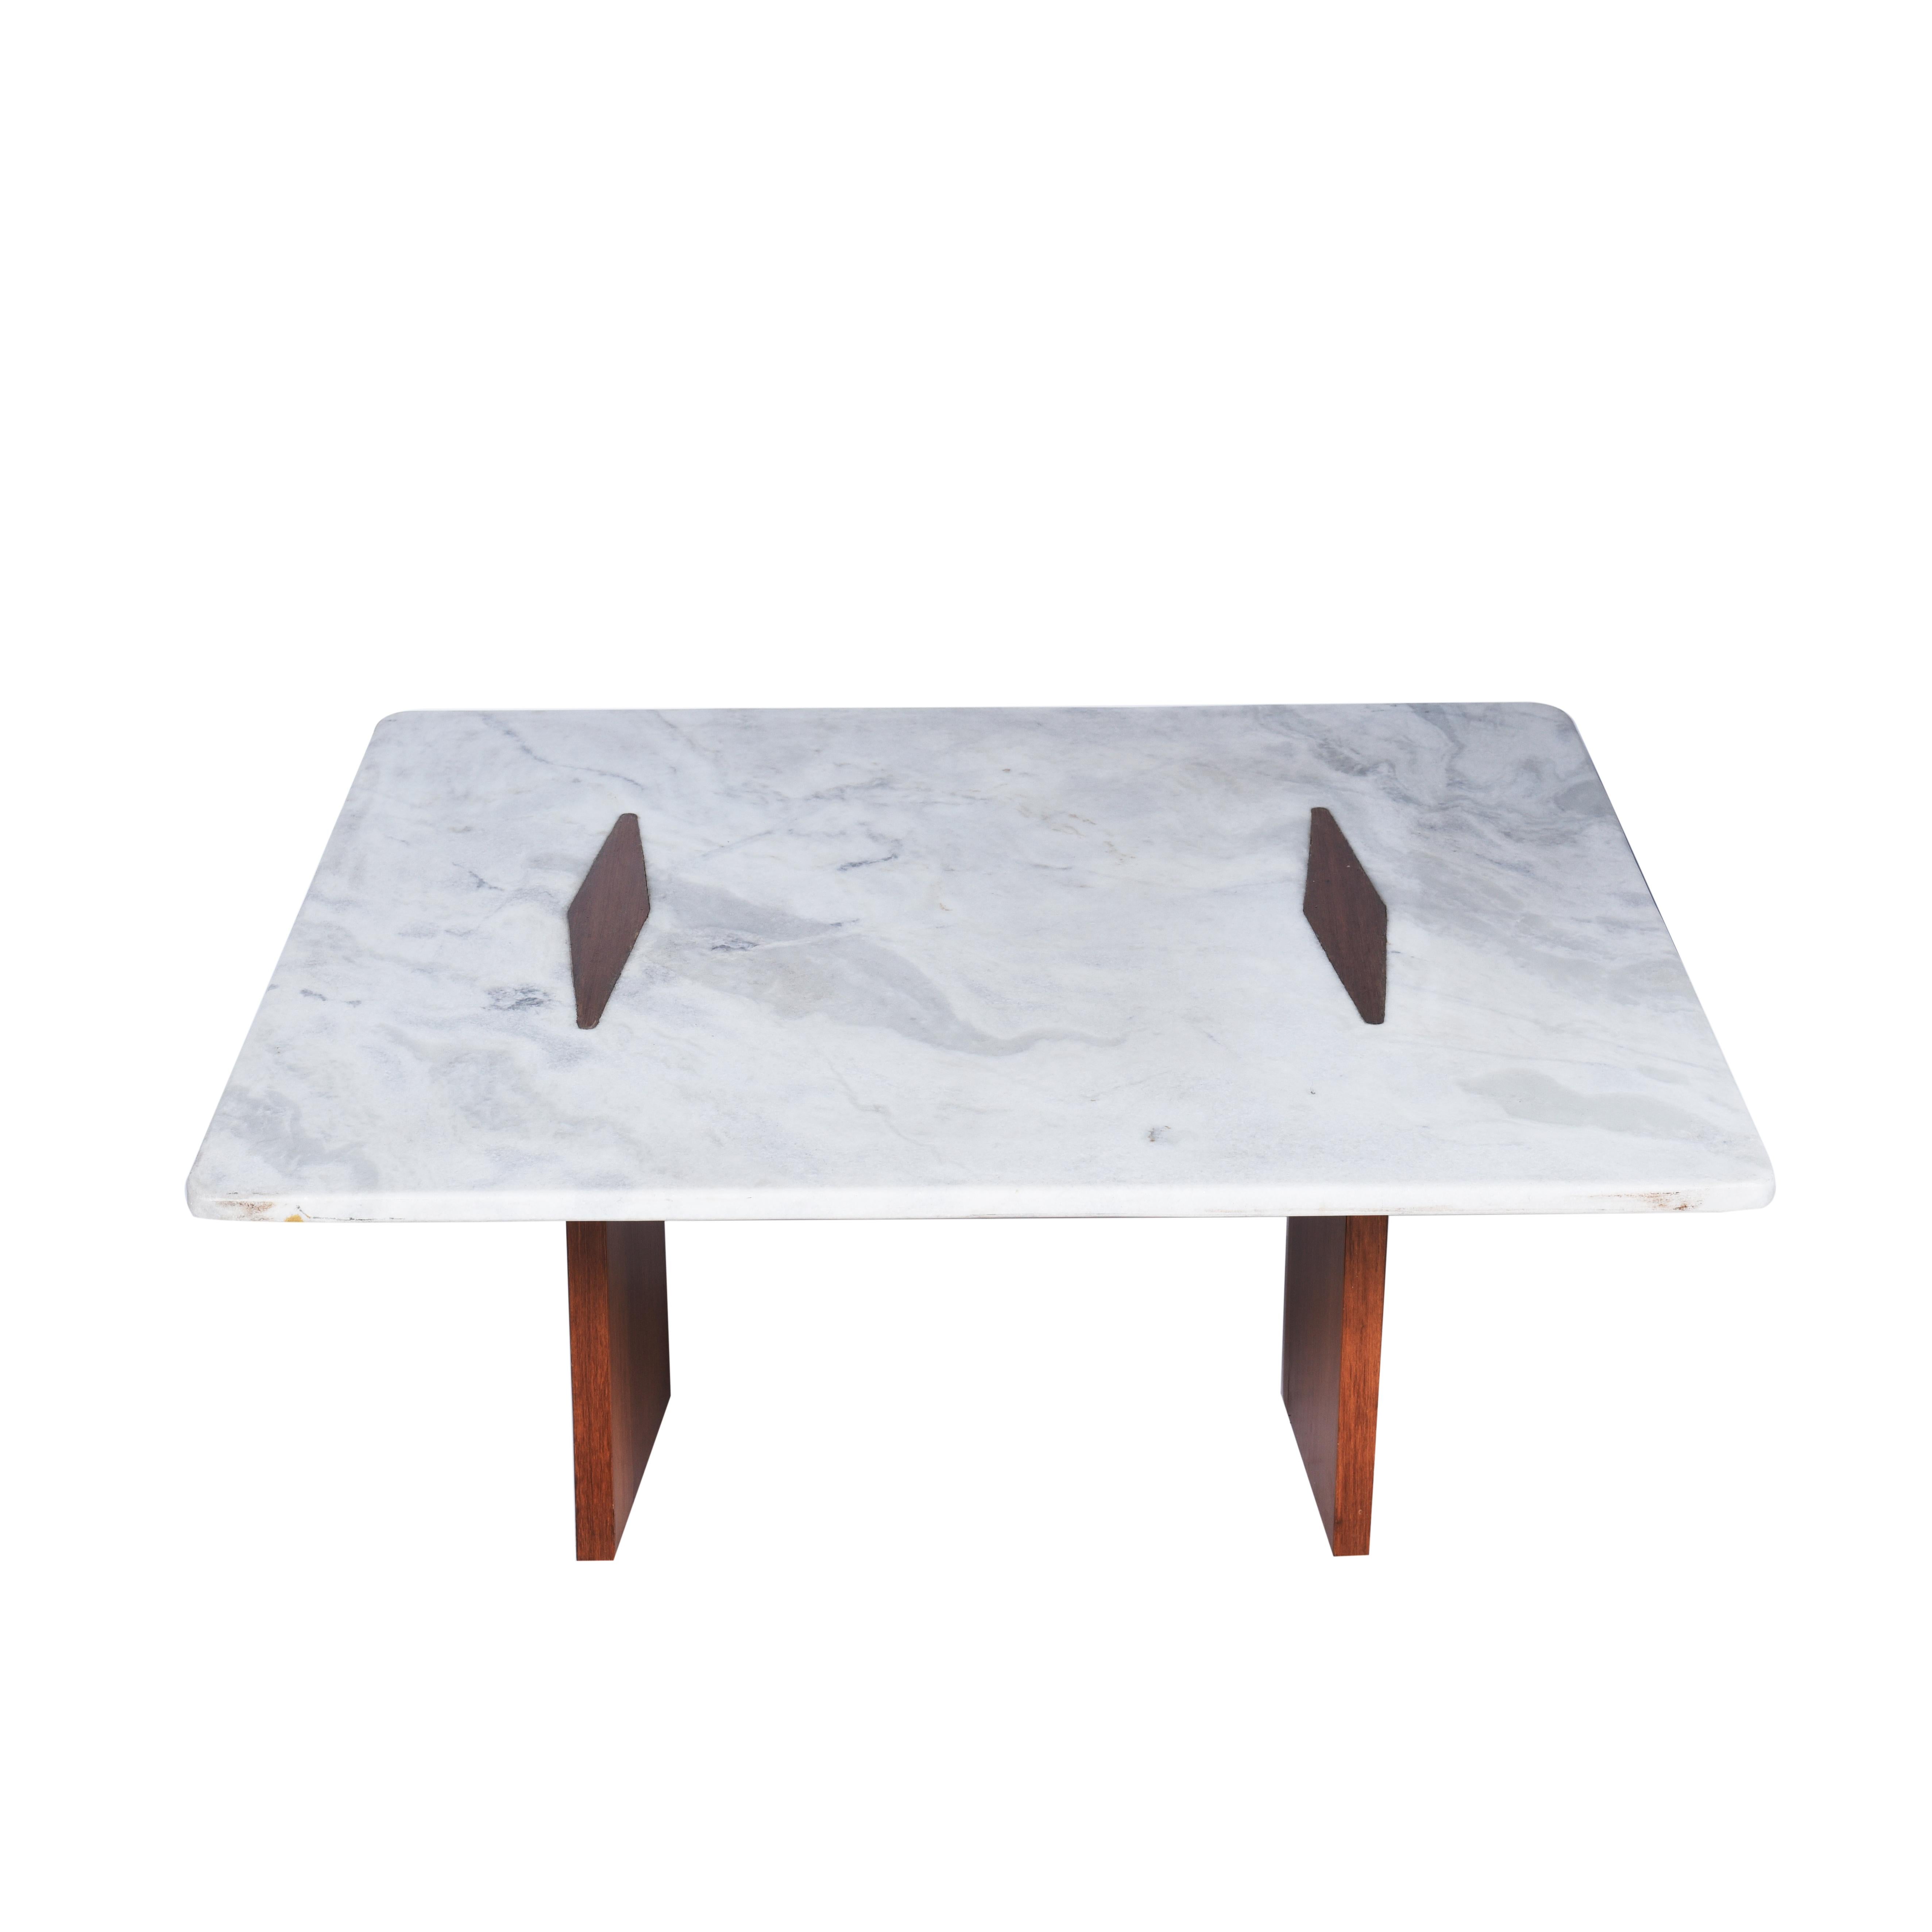 Jorge Zalszupin midcentury Brazilian center table with marble top and Perobinha do Campo Structure, 1960s.

With an elegant design, this beautiful marble-top coffee table is supported by two strong bases in wood veneered wood Perobinha do Campo.